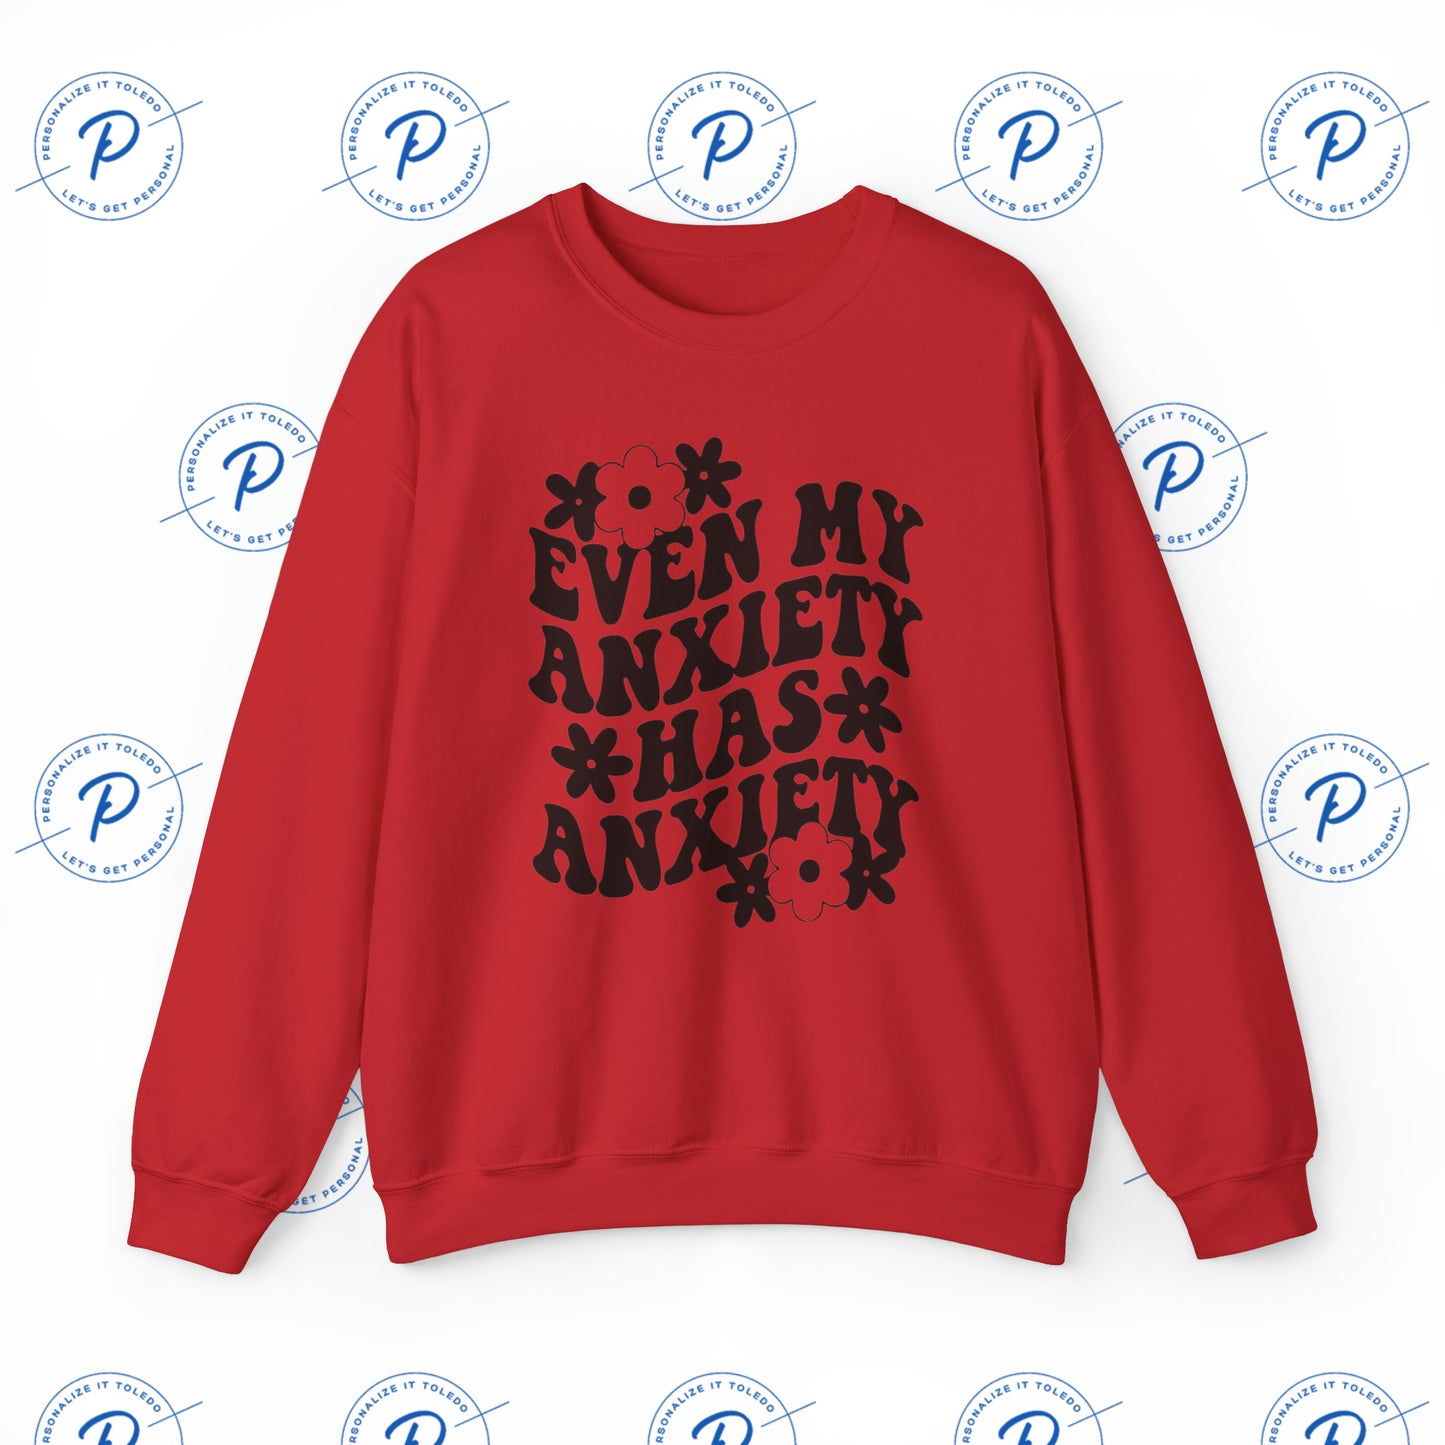 Even My Anxiety Has Anxiety Retro Jitters Cozy Blend Sweatshirt - Funny Apparel For Her